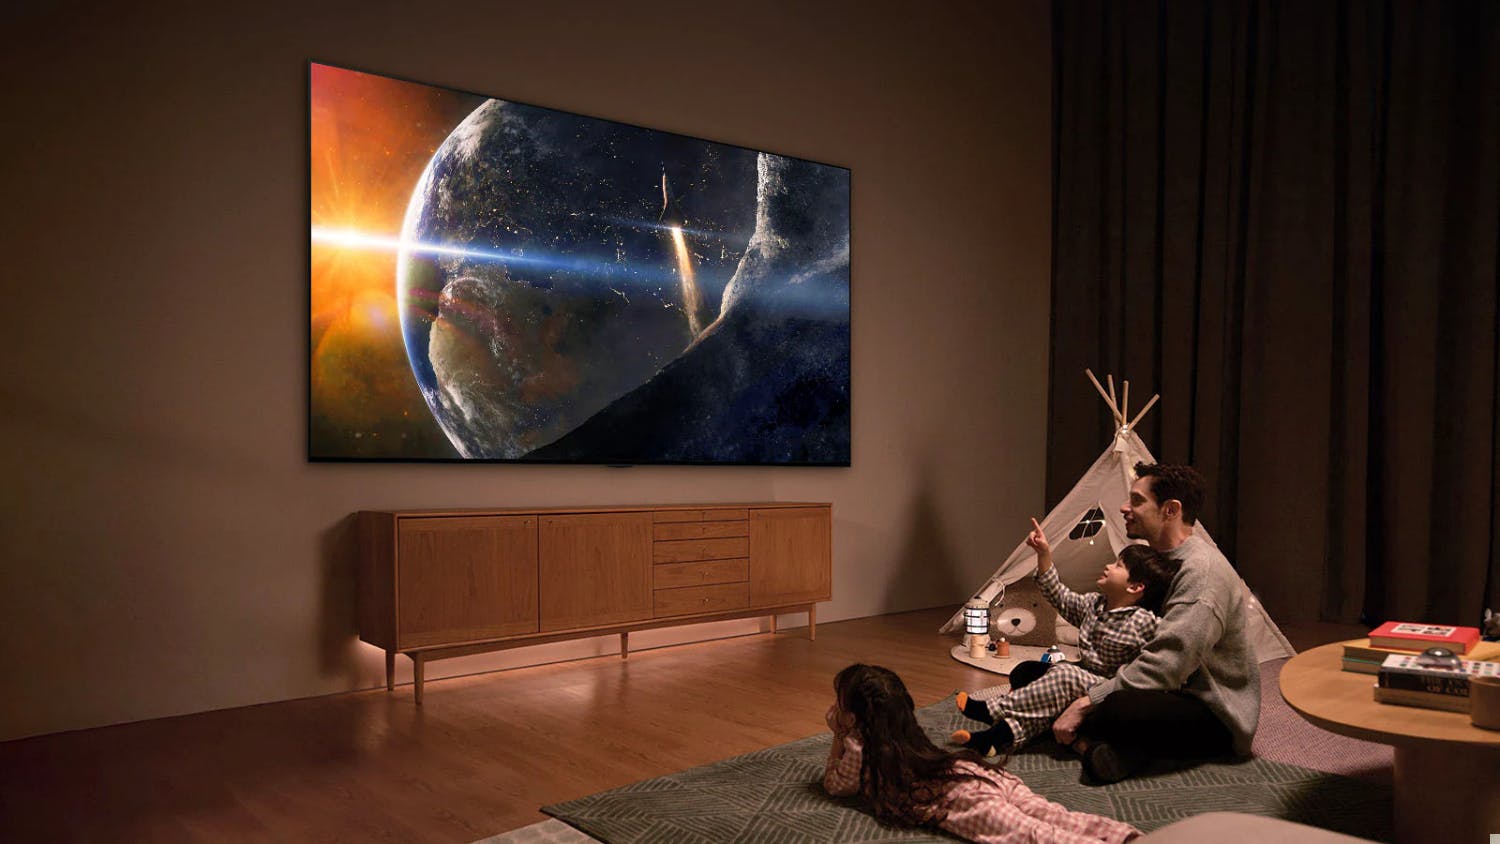 LG 50" QNED86 Smart 4K QNED TV (2024)